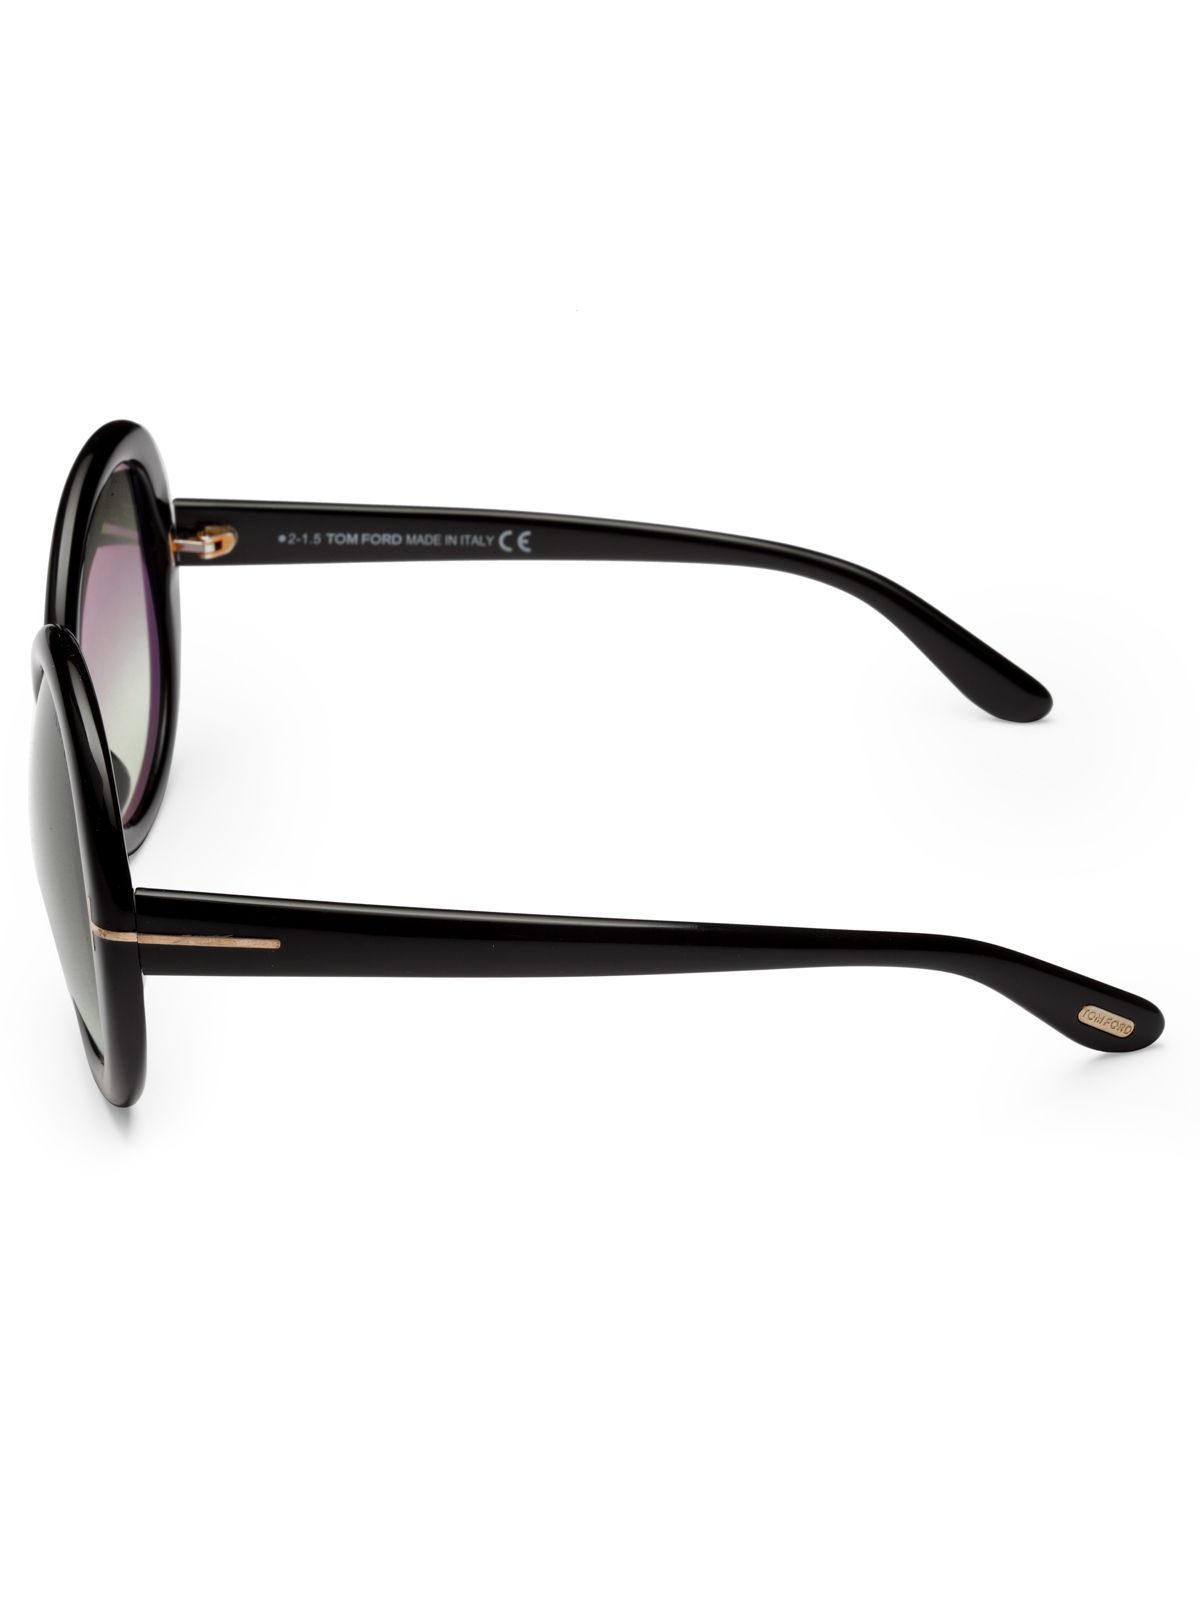 Tom Ford Grey Oversized Sunglasses ( GISELLA 388 01B|58 ) - Buy Tom Ford  Grey Oversized Sunglasses ( GISELLA 388 01B|58 ) Online at Low Price -  Snapdeal